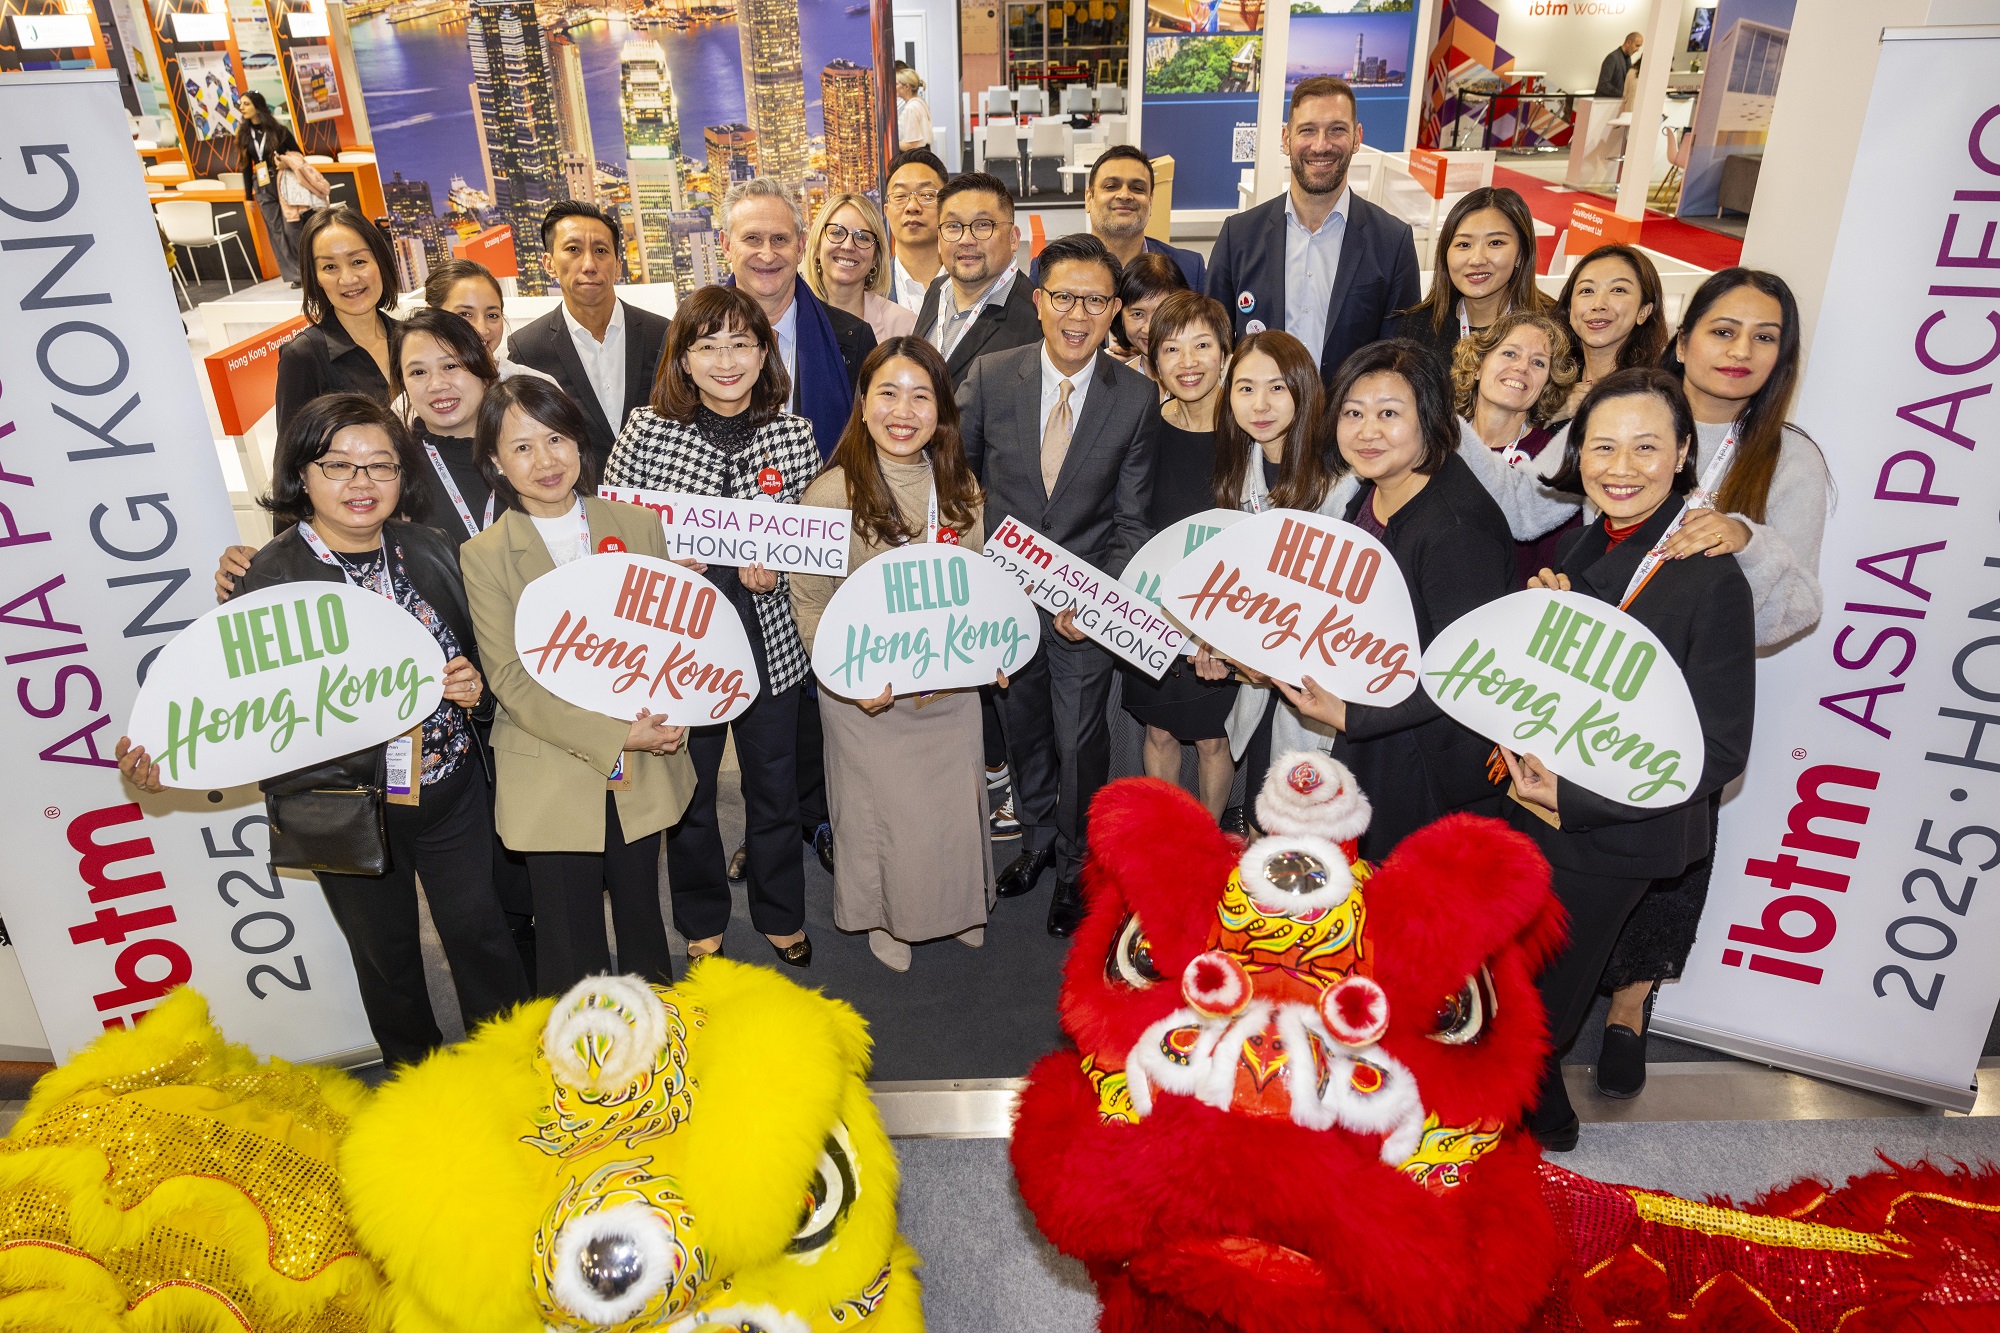 Team Hong Kong celebrates the announcement of IBTM Asia Pacific 2025 at Hong Kong Stand with a lion dance performance.